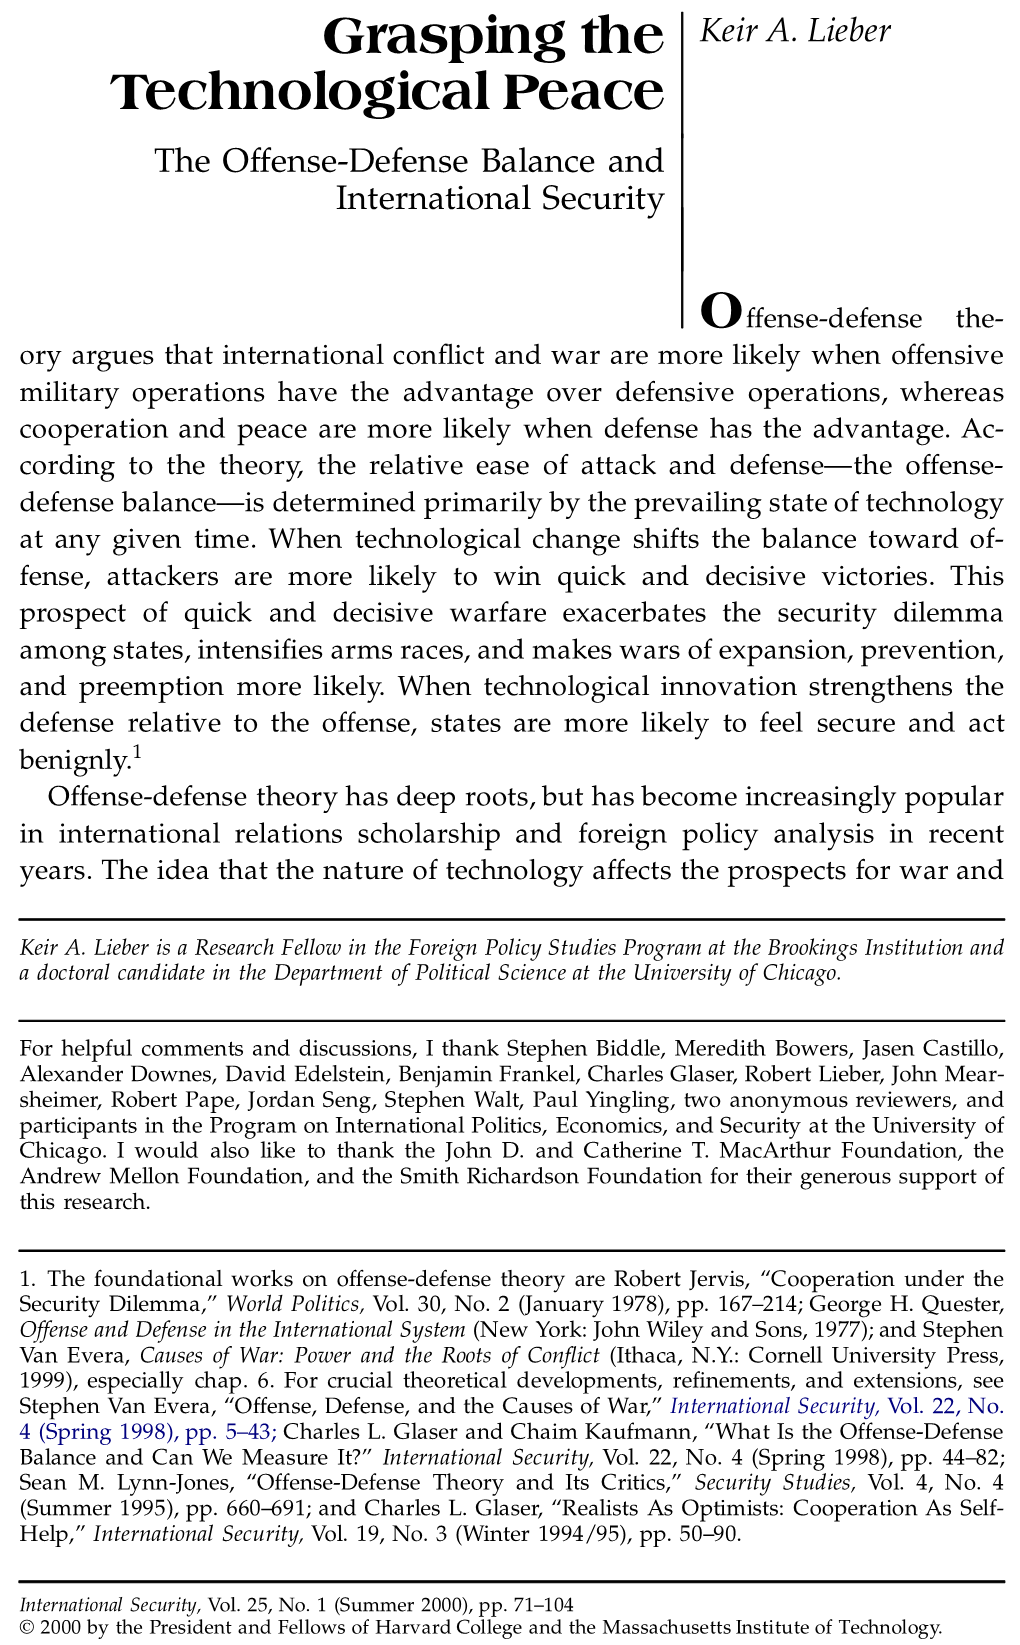 Grasping the Technological Peace: the Offense-Defense Balance And